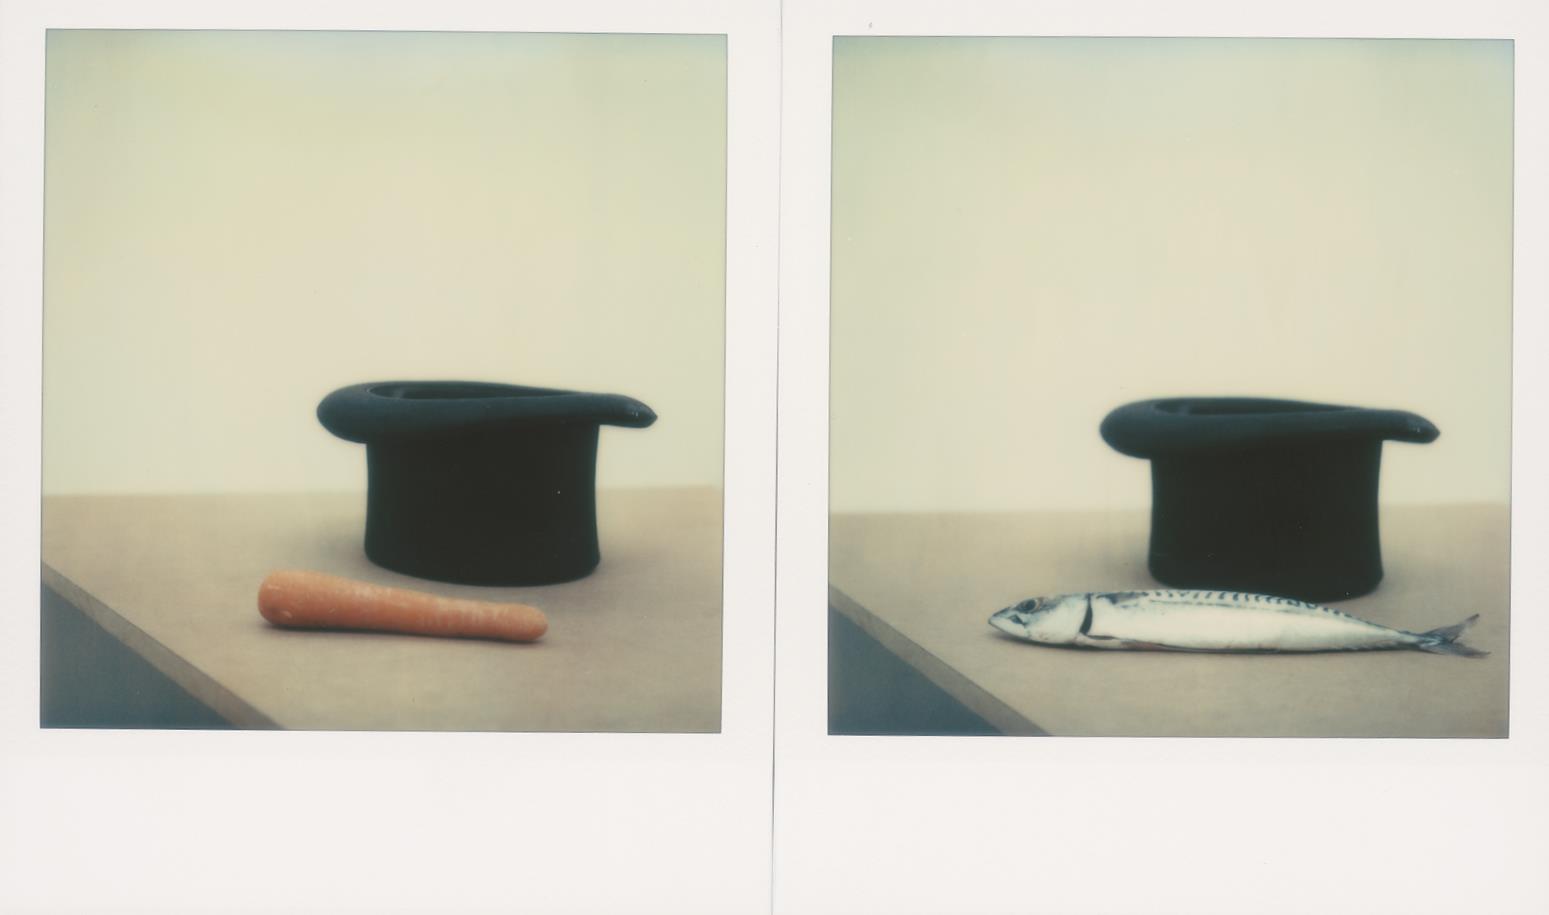 2 colour polaroid photographs side by side. The photographs depict the same a top hat with a carrot next to it in the first photograph, and a fish in the second. Included in the exhibition Magic Show.